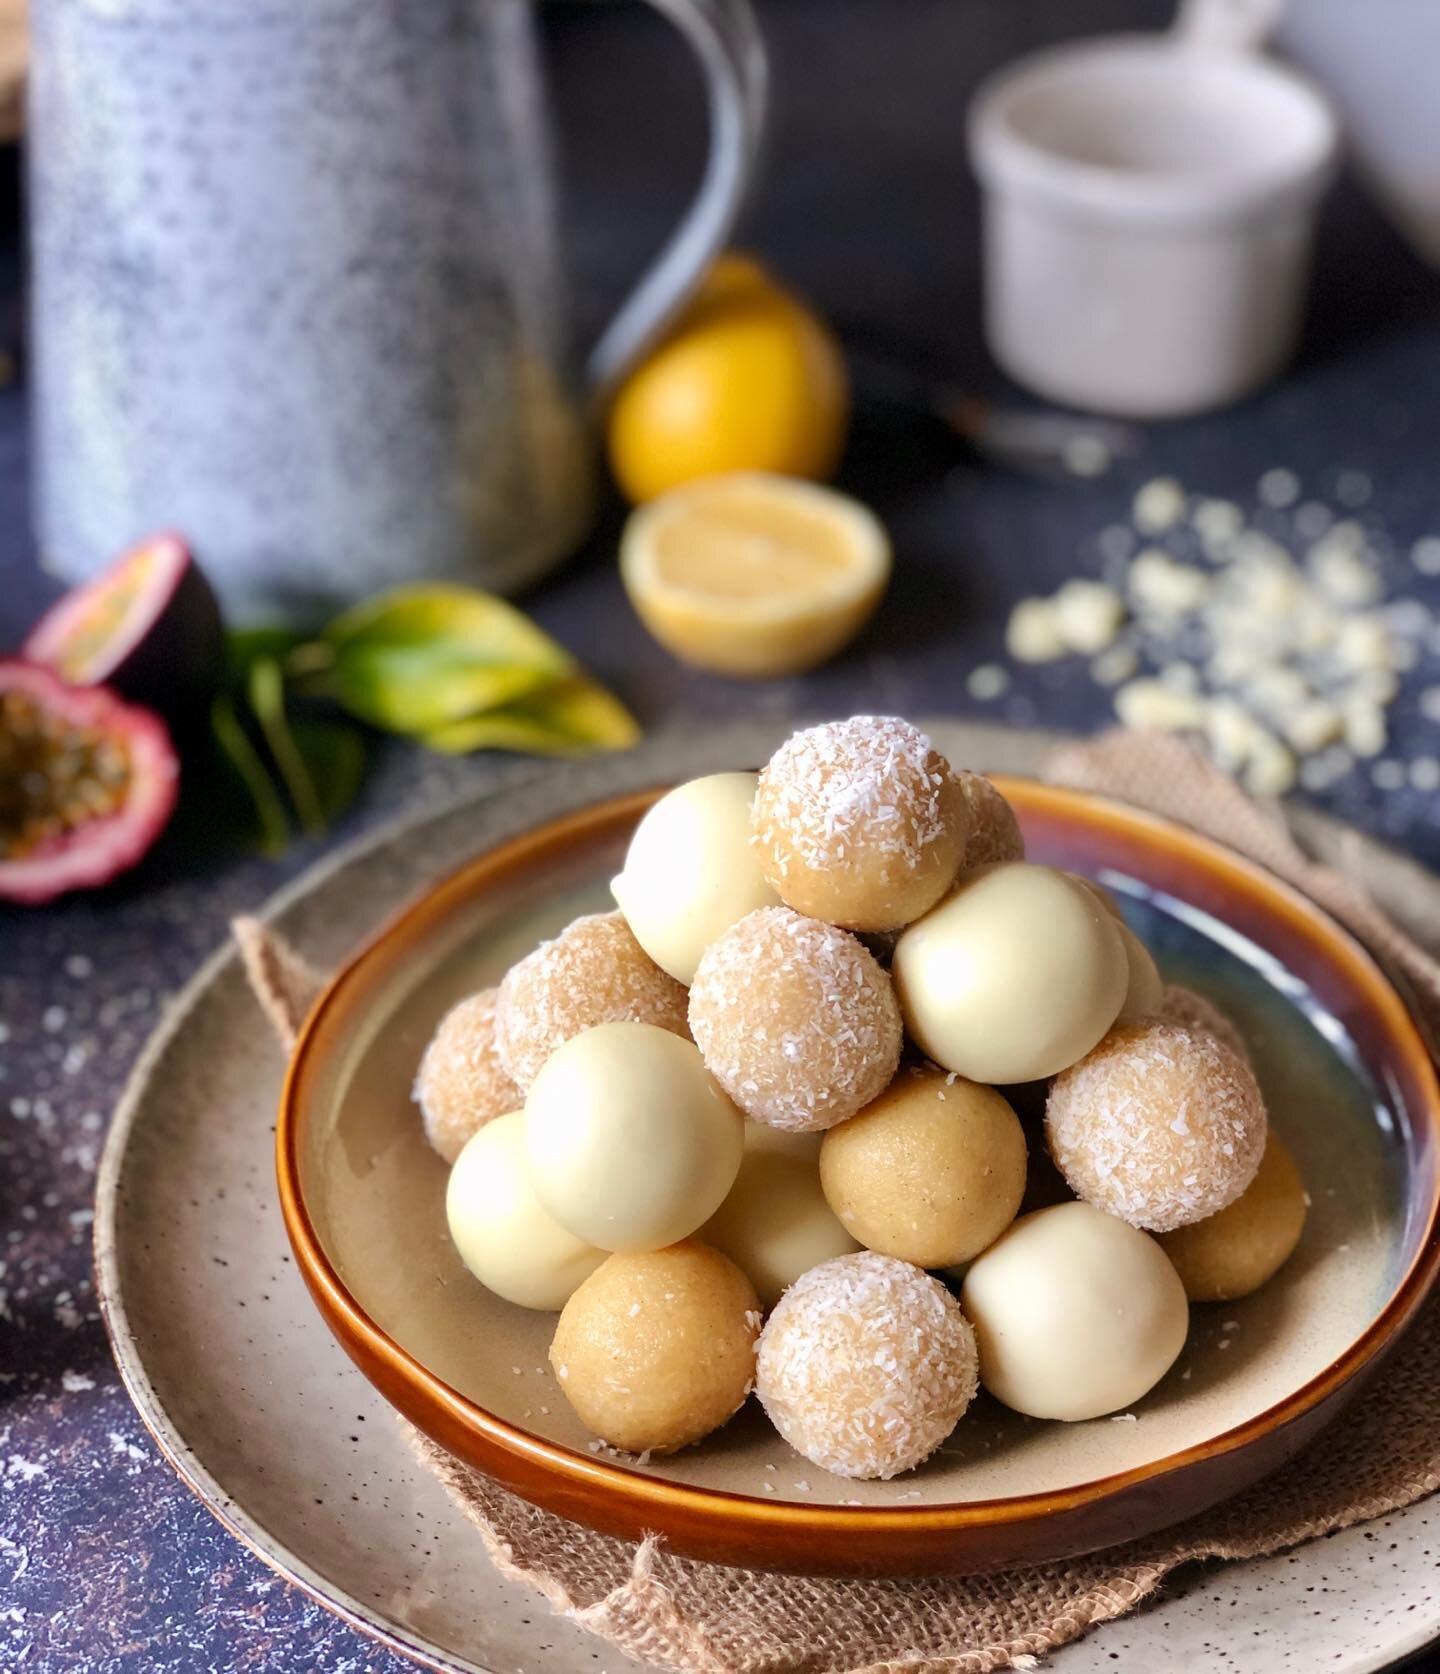 Passion fruit, coconut, vanilla and lemon bliss balls. Gluten free and vegan unless you are like me and dip them in white chocolate!
Works really well with Pana&rsquo;s vegan salted caramel white choc yum!
Check out www.dearfig.com for the recipe 
#p